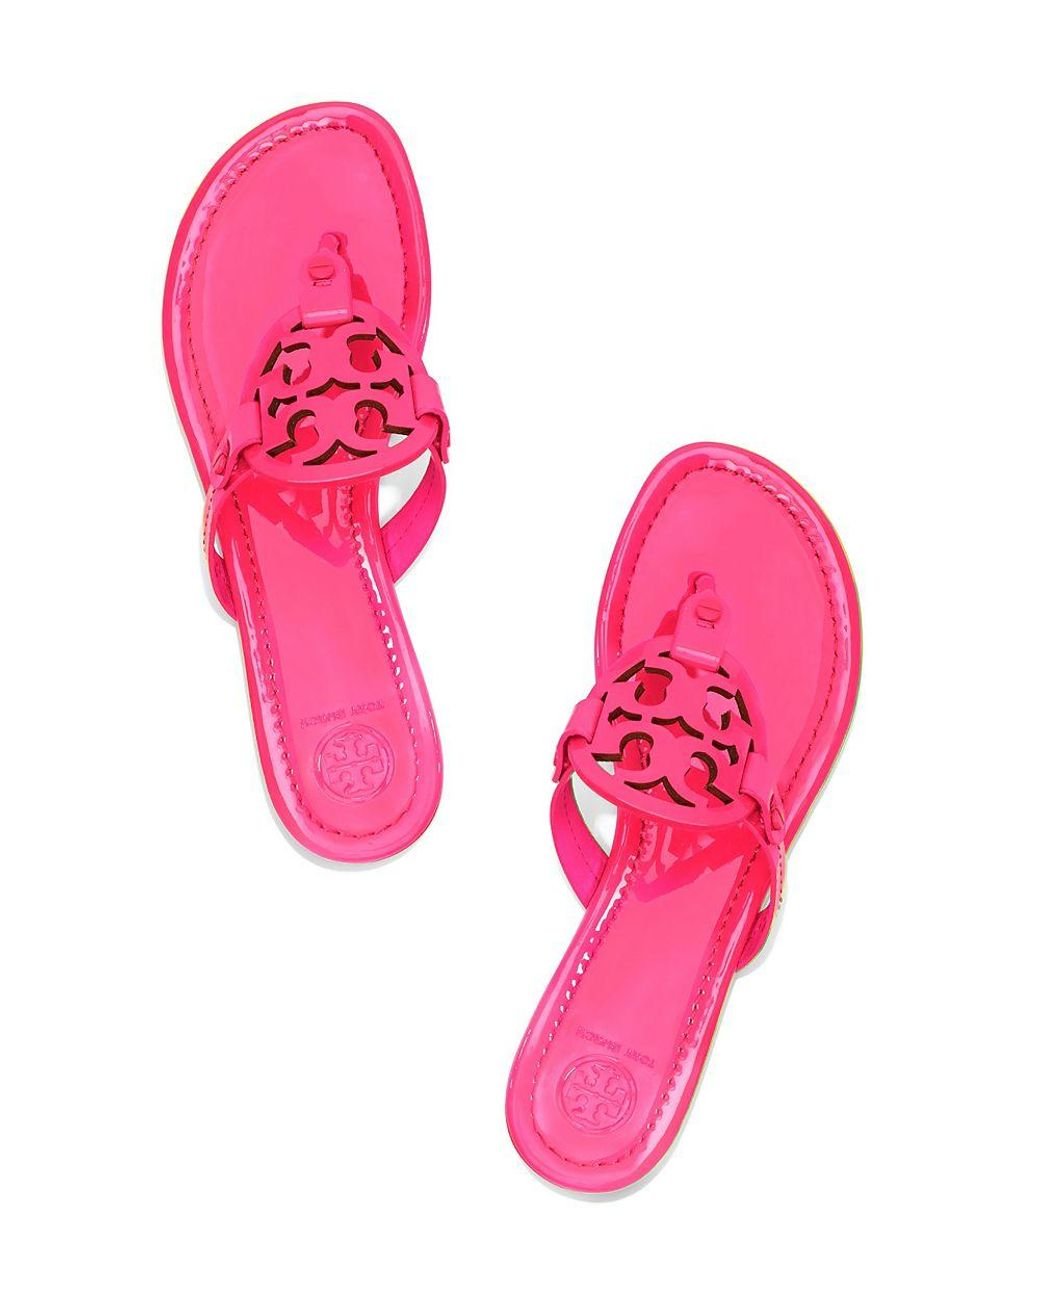 Tory Burch Miller Fluorescent Sandal, Patent Leather in Pink | Lyst